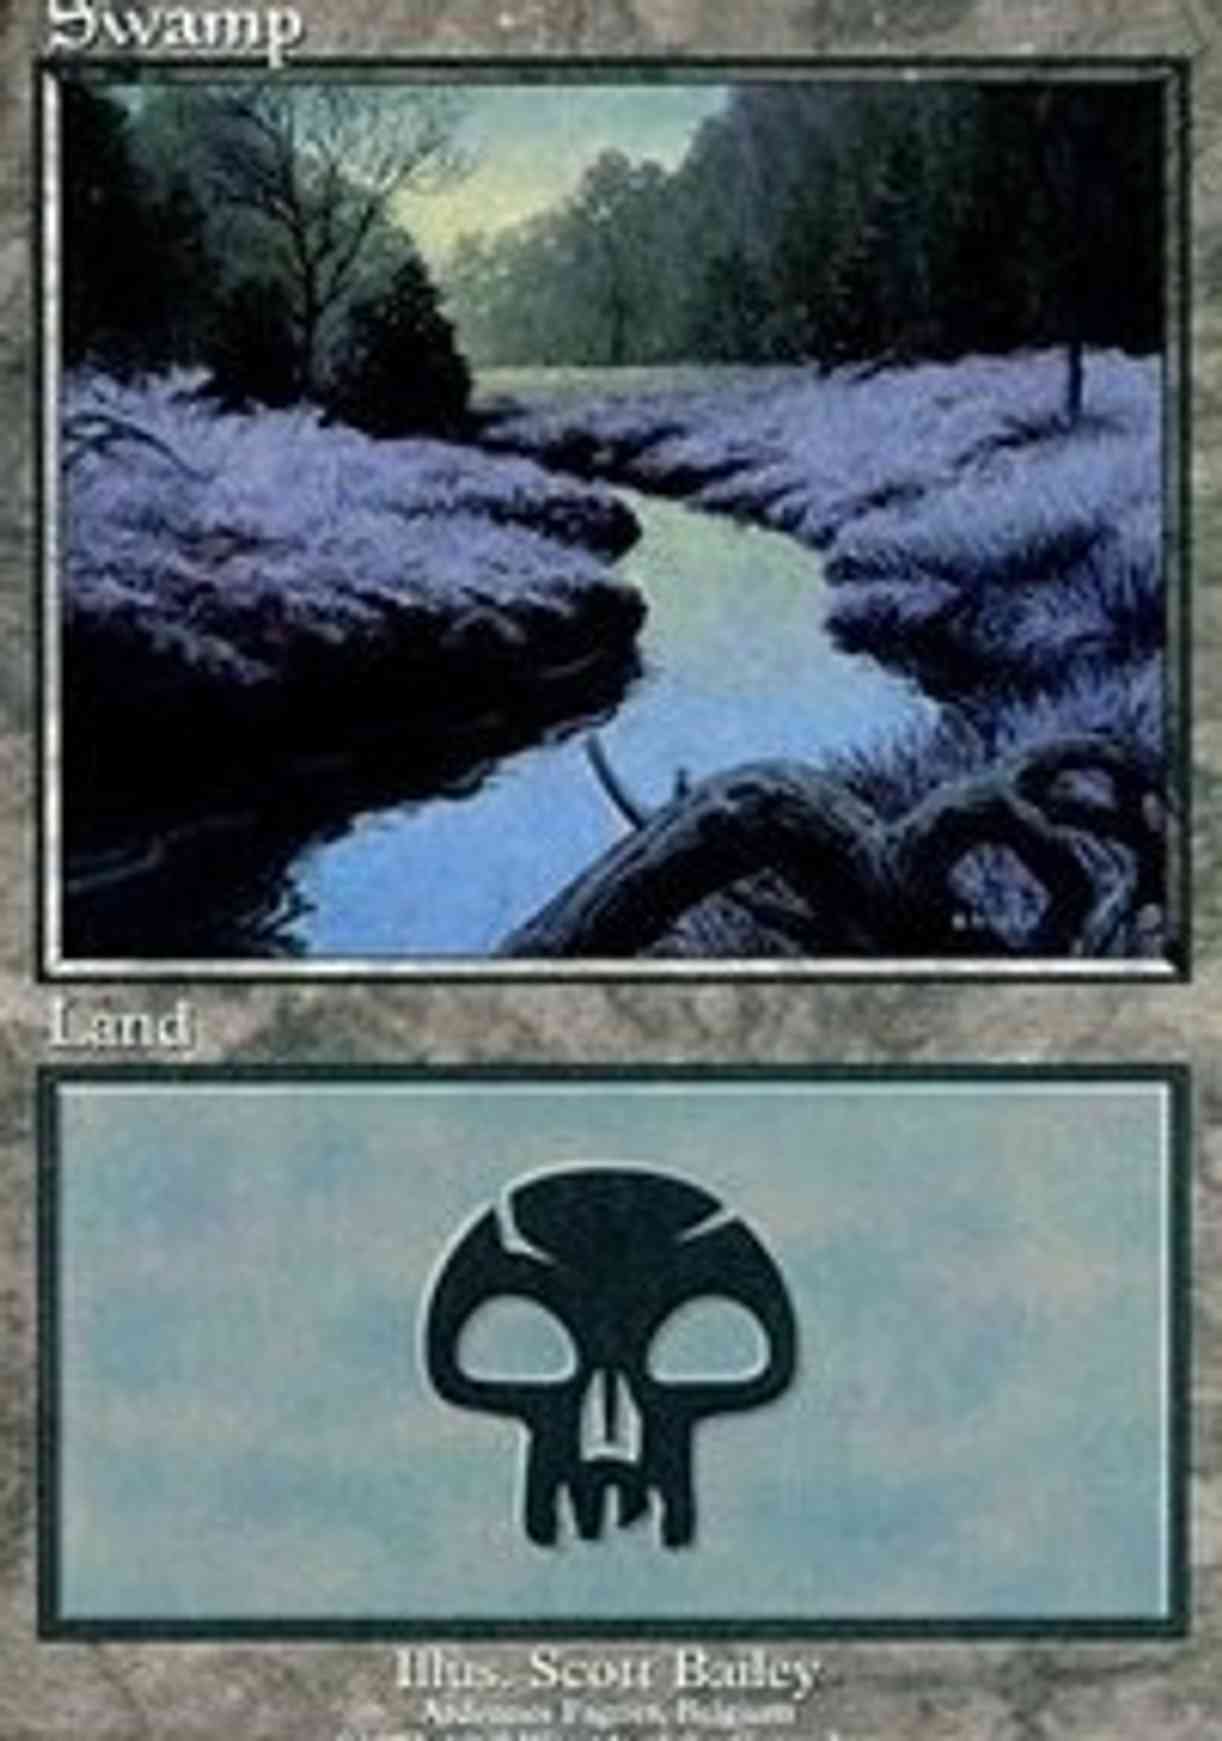 Swamp - Ardennes Fagnes magic card front